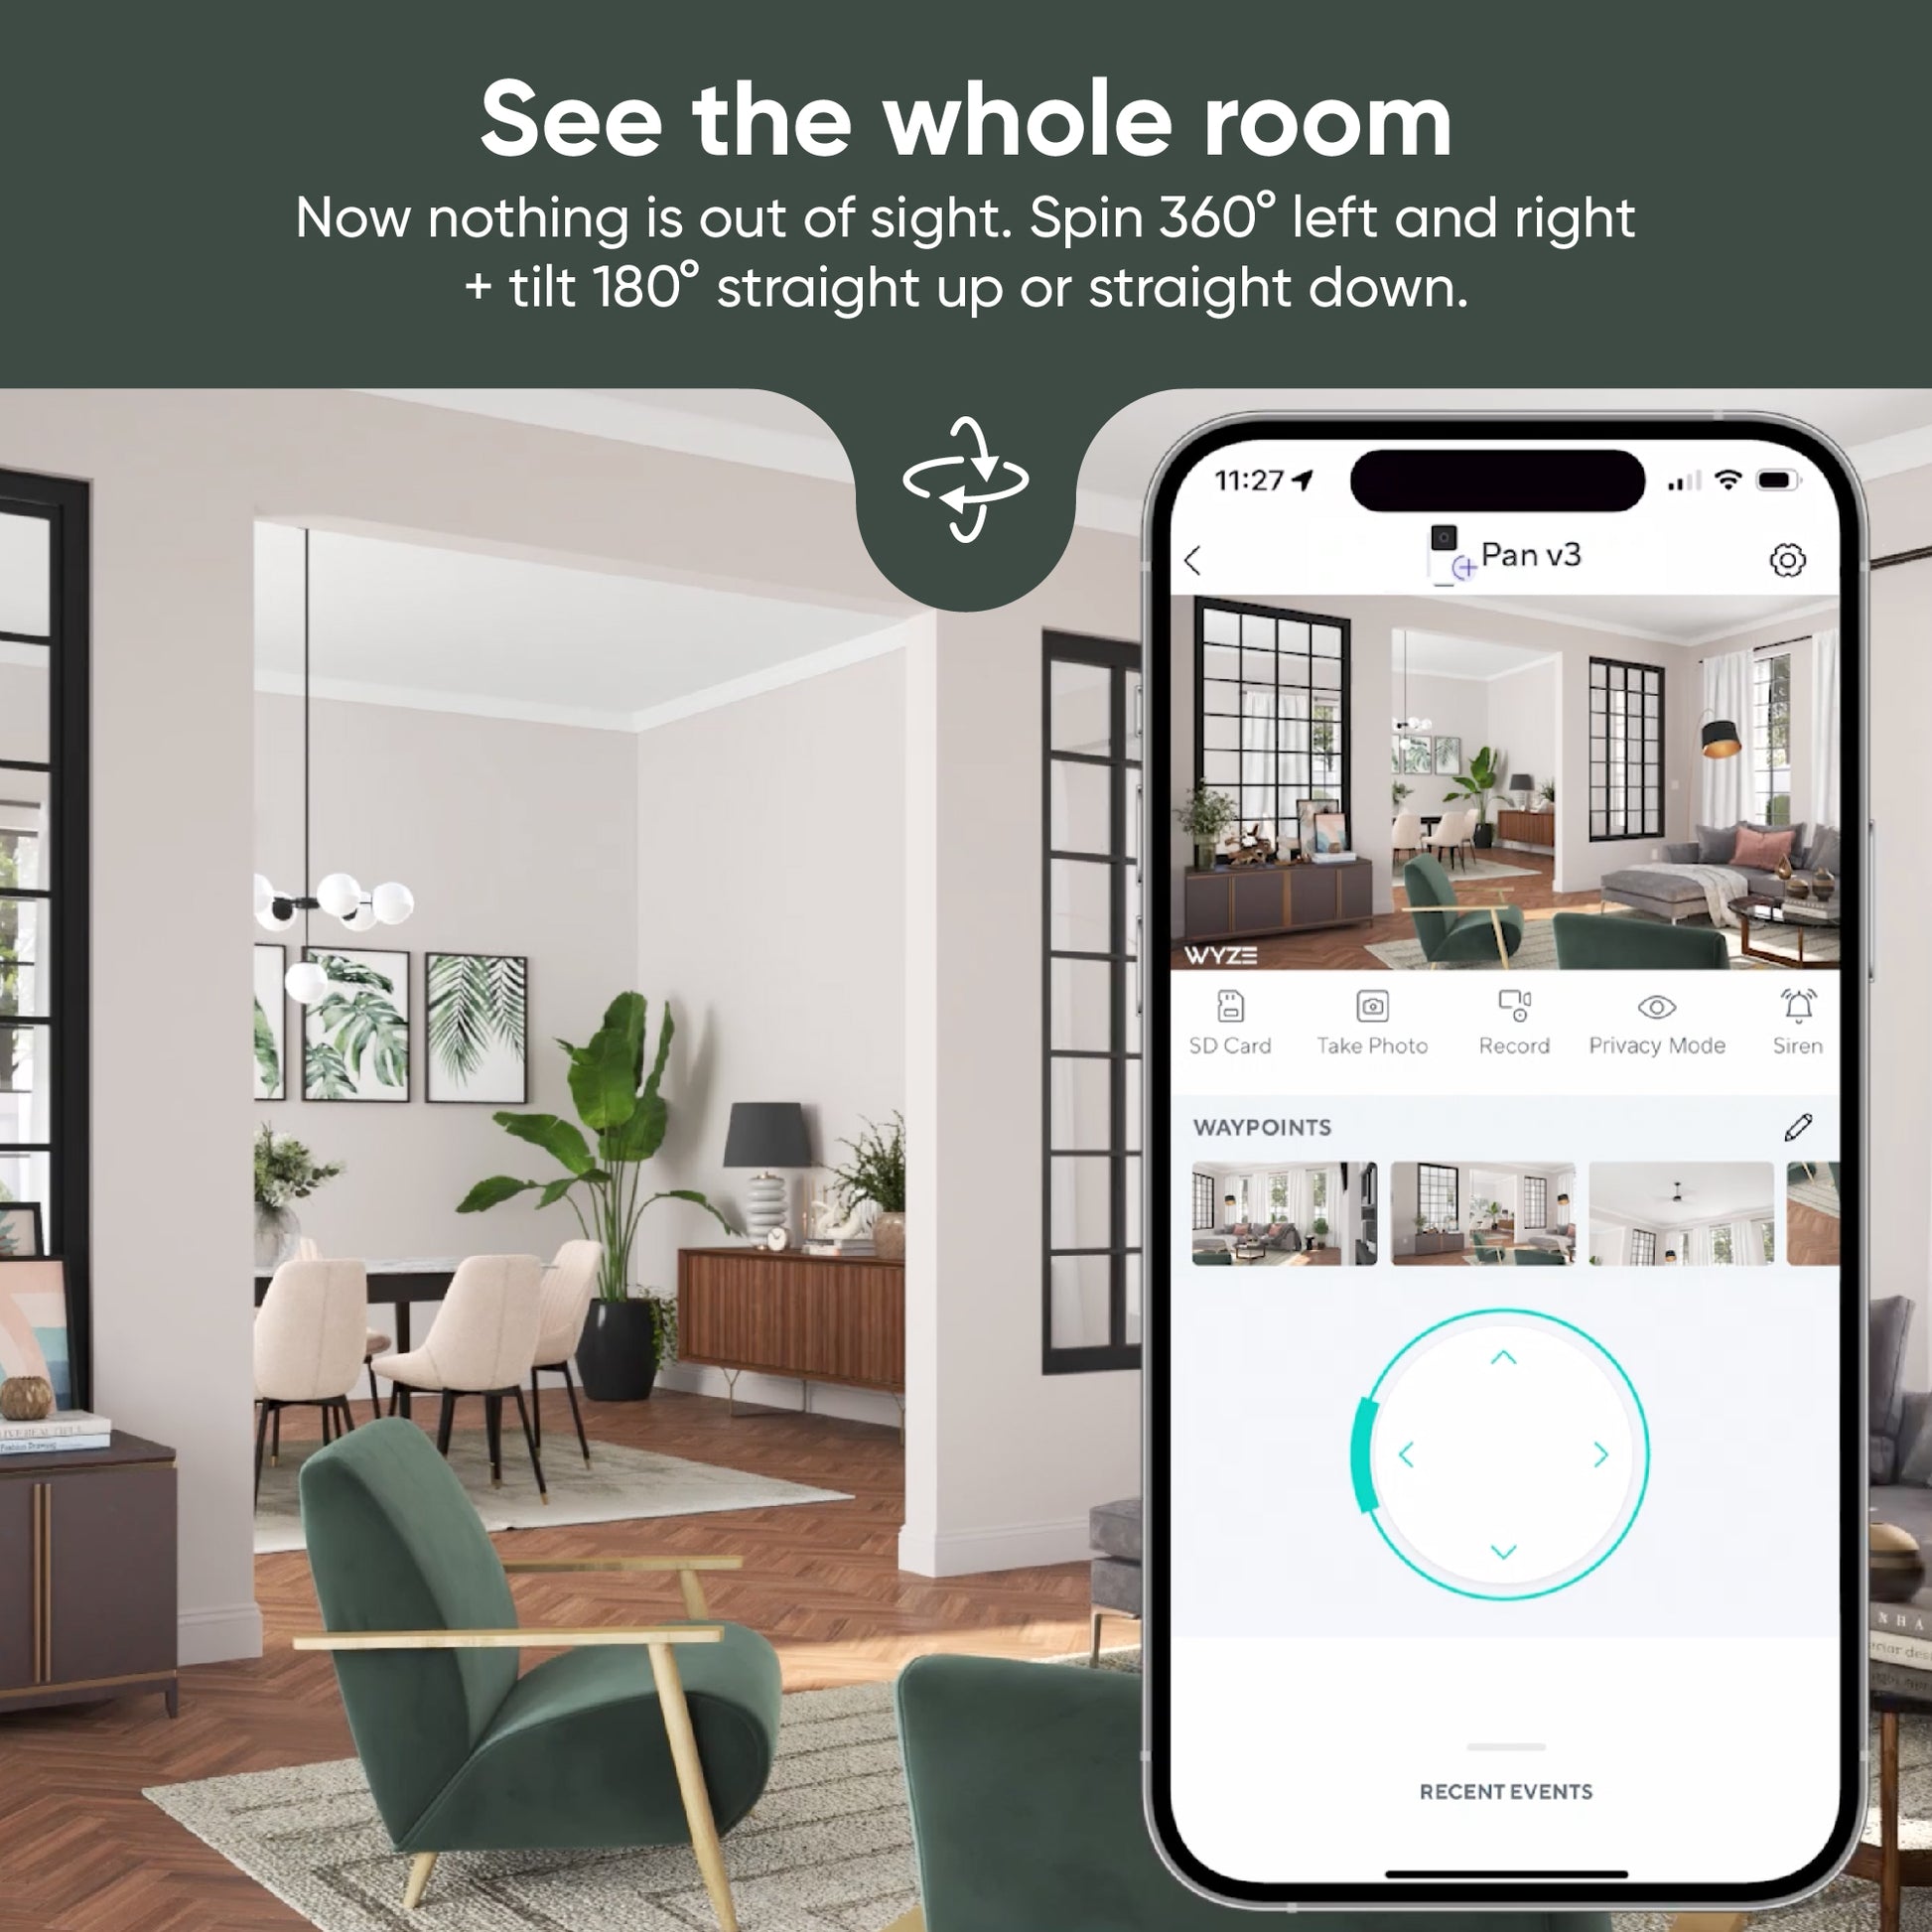 Text overlay "See the whole room." Living room with a smartphone showing the Wyze app with the same view of that living room. 